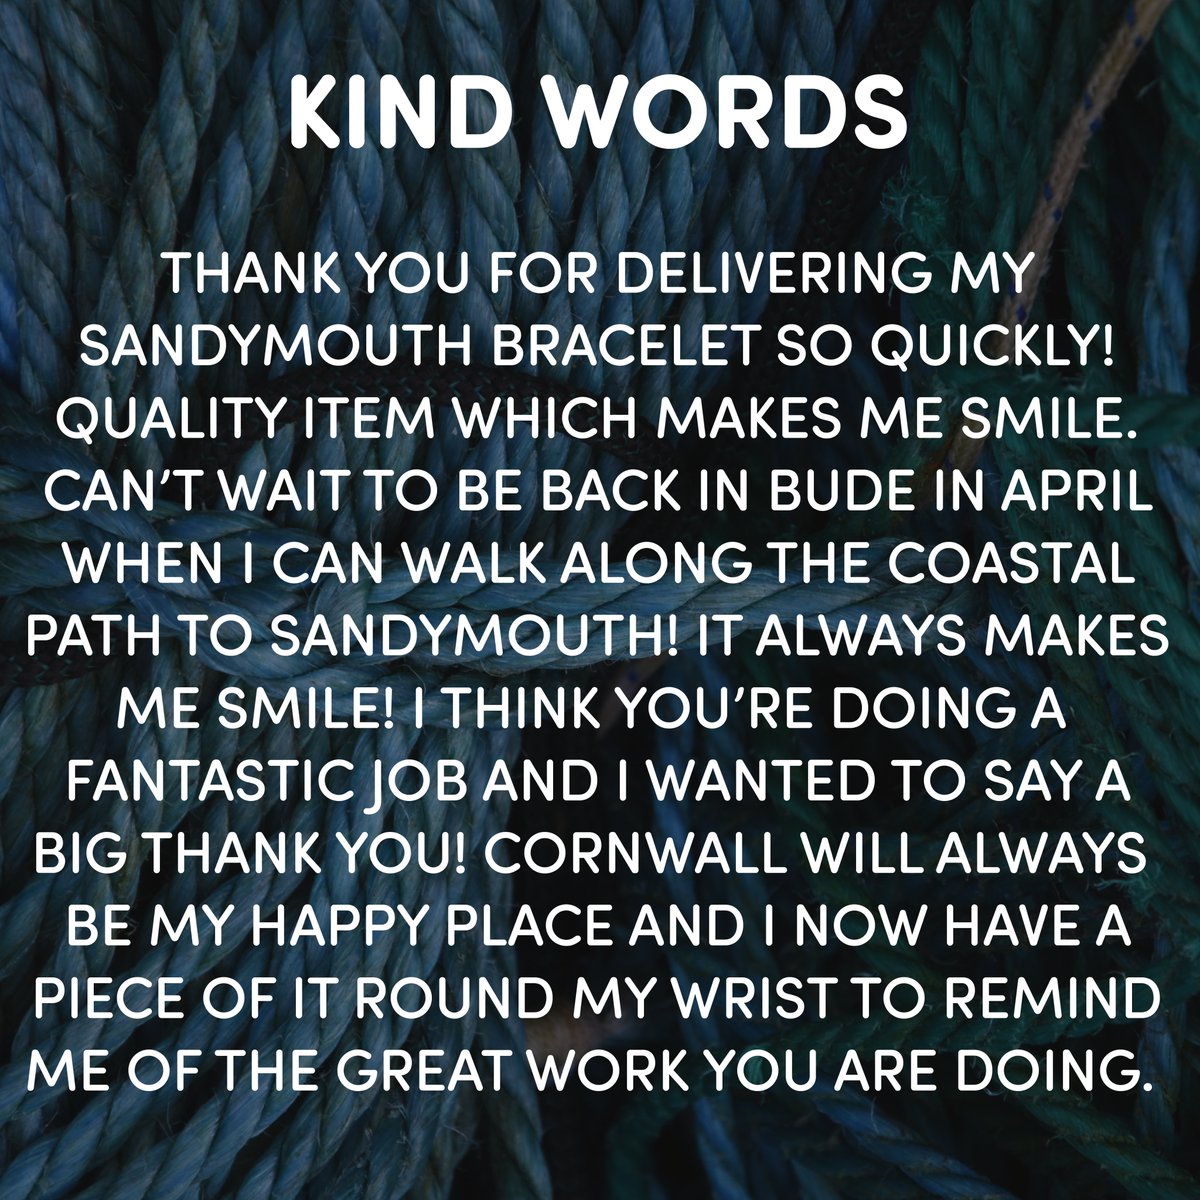 Kind Words
💙
#sandymouth #bude #cornwall #ecogift #ecopresent #sustainablepresents #sustainablegifts #sustainablegift #sustainablegiftsuk #seagift #recycledgift #recycledgifts